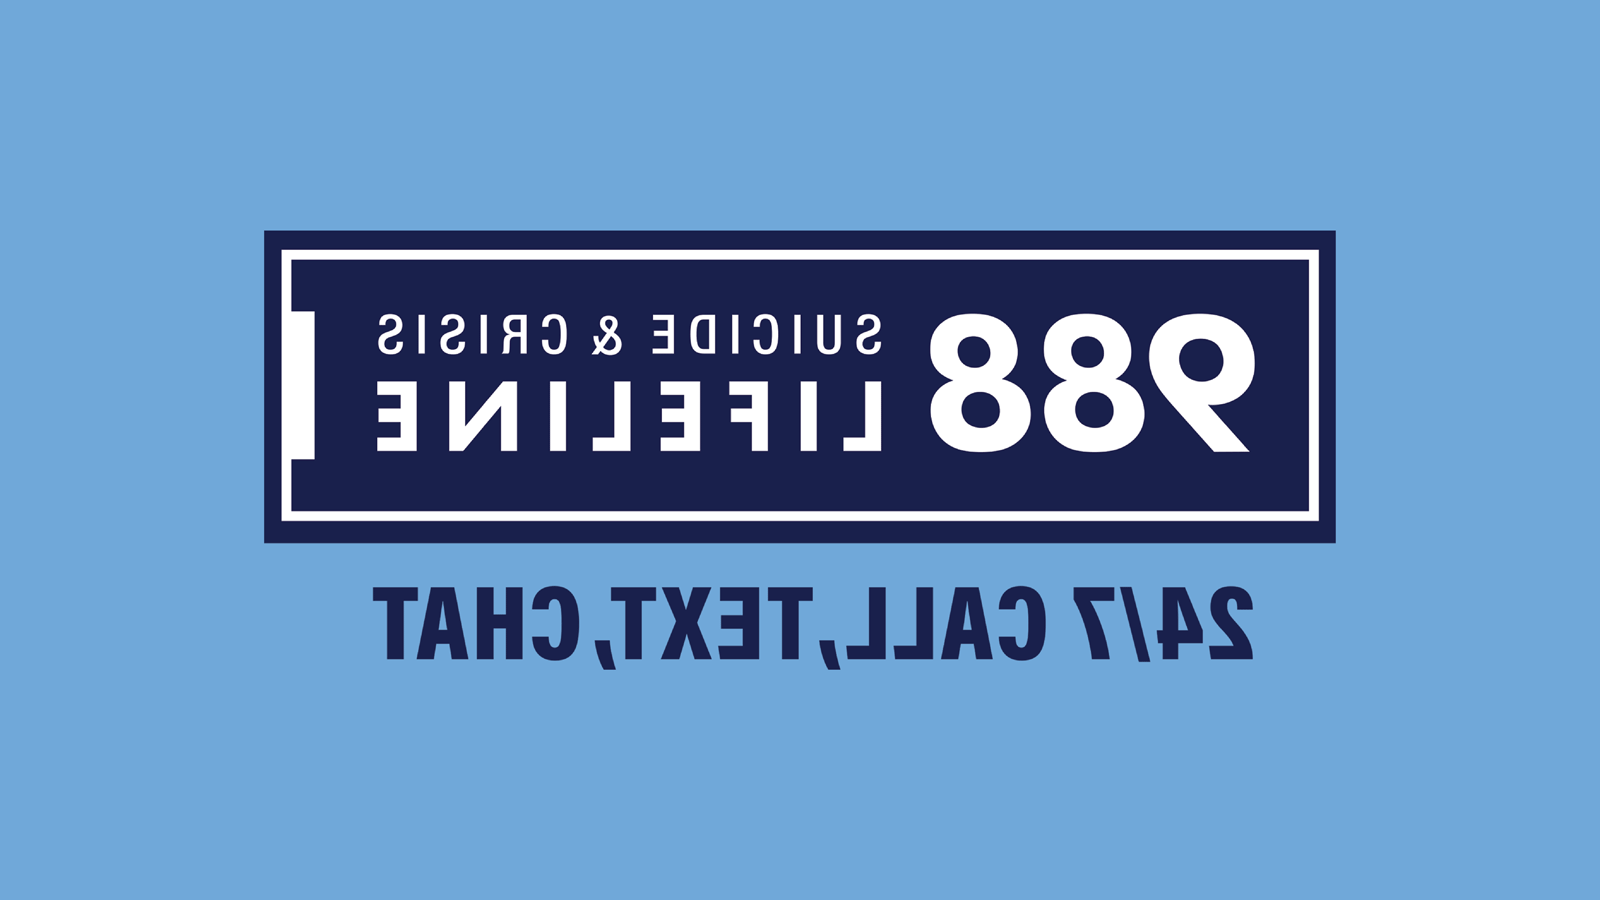 988 Suicide and crisis lifeline is in white font inside a navy blue rectangle with a white outline surrounded by a navy blue outline. 24/ call, text, chat is in navy blue font under the rectangular box. The background is a sky blue rectangle.